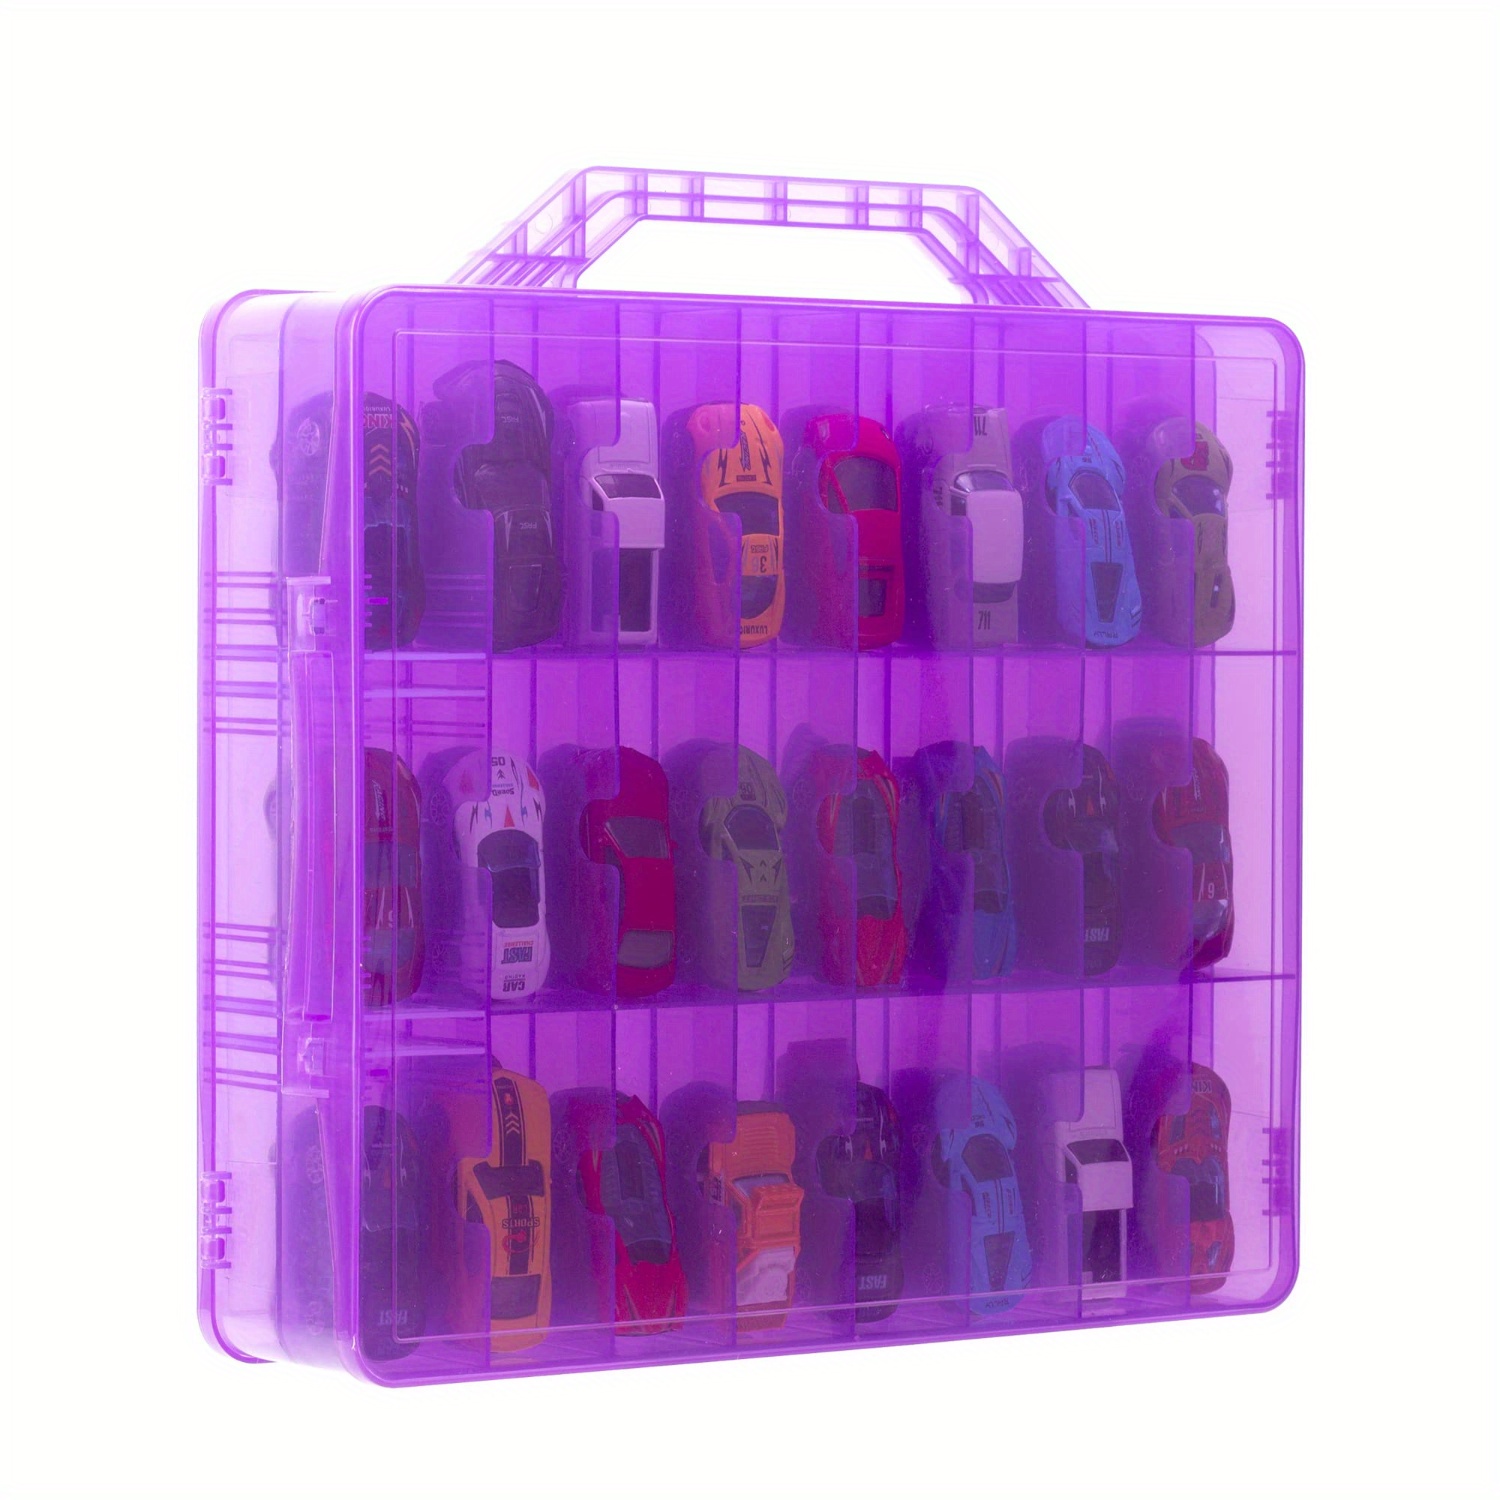 Double Sided Toy Storage Organizer Case for Hot Wheels Car, for Matchbox  Cars, for Mini Toys, for Small Dolls. Carrying Box Container Carrier with  48